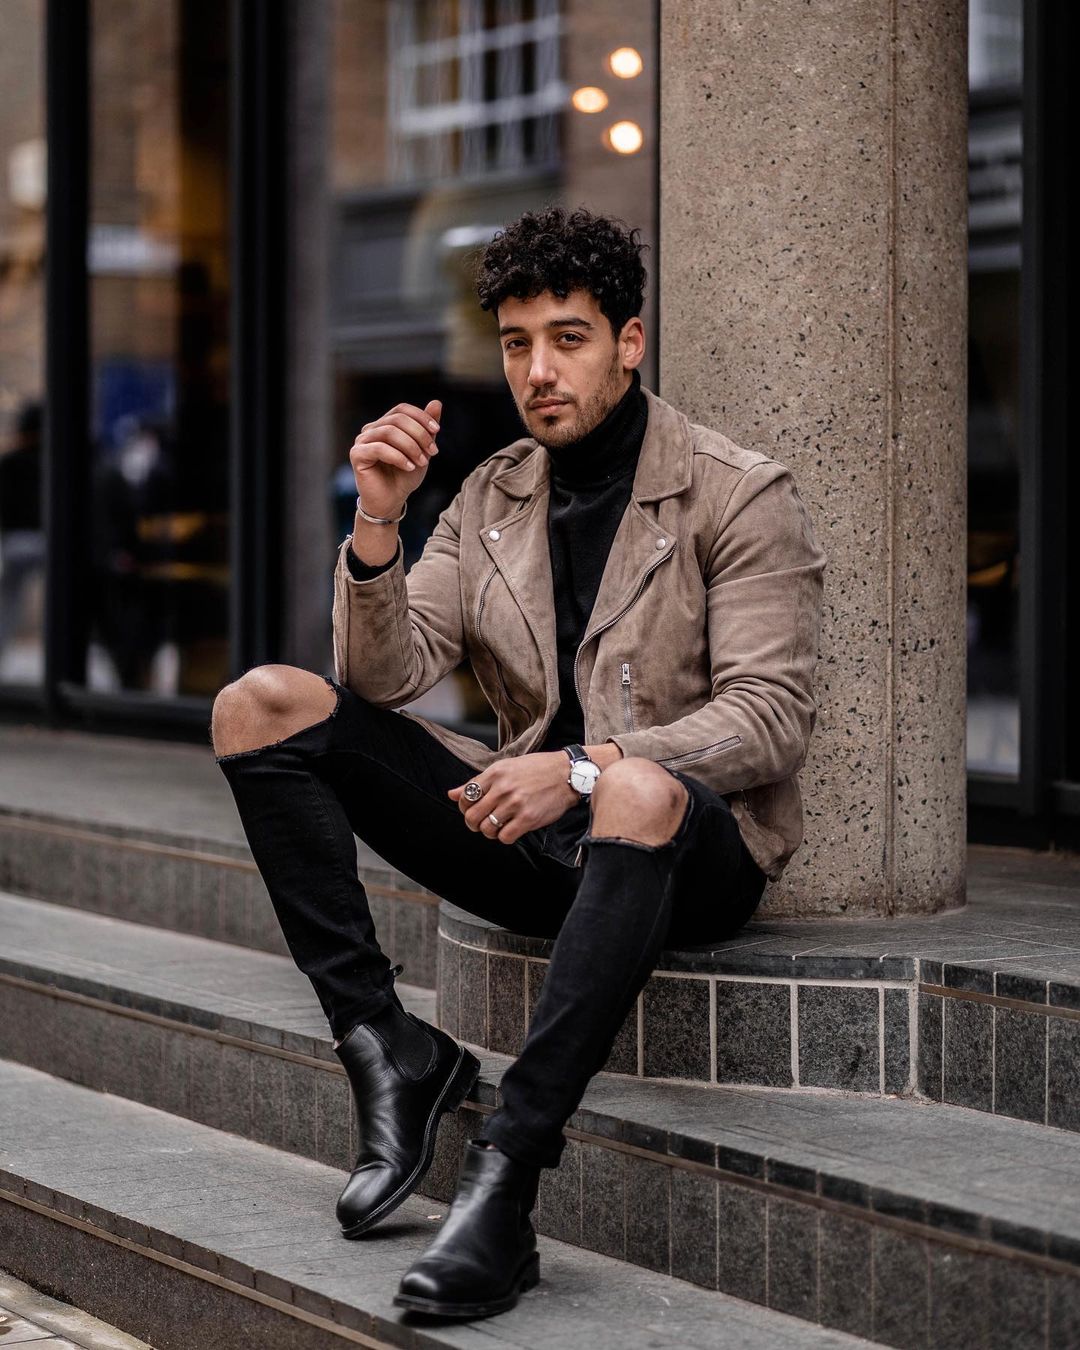 25 tried and tested knee-ripped jeans outfit ideas for guys to try this ...